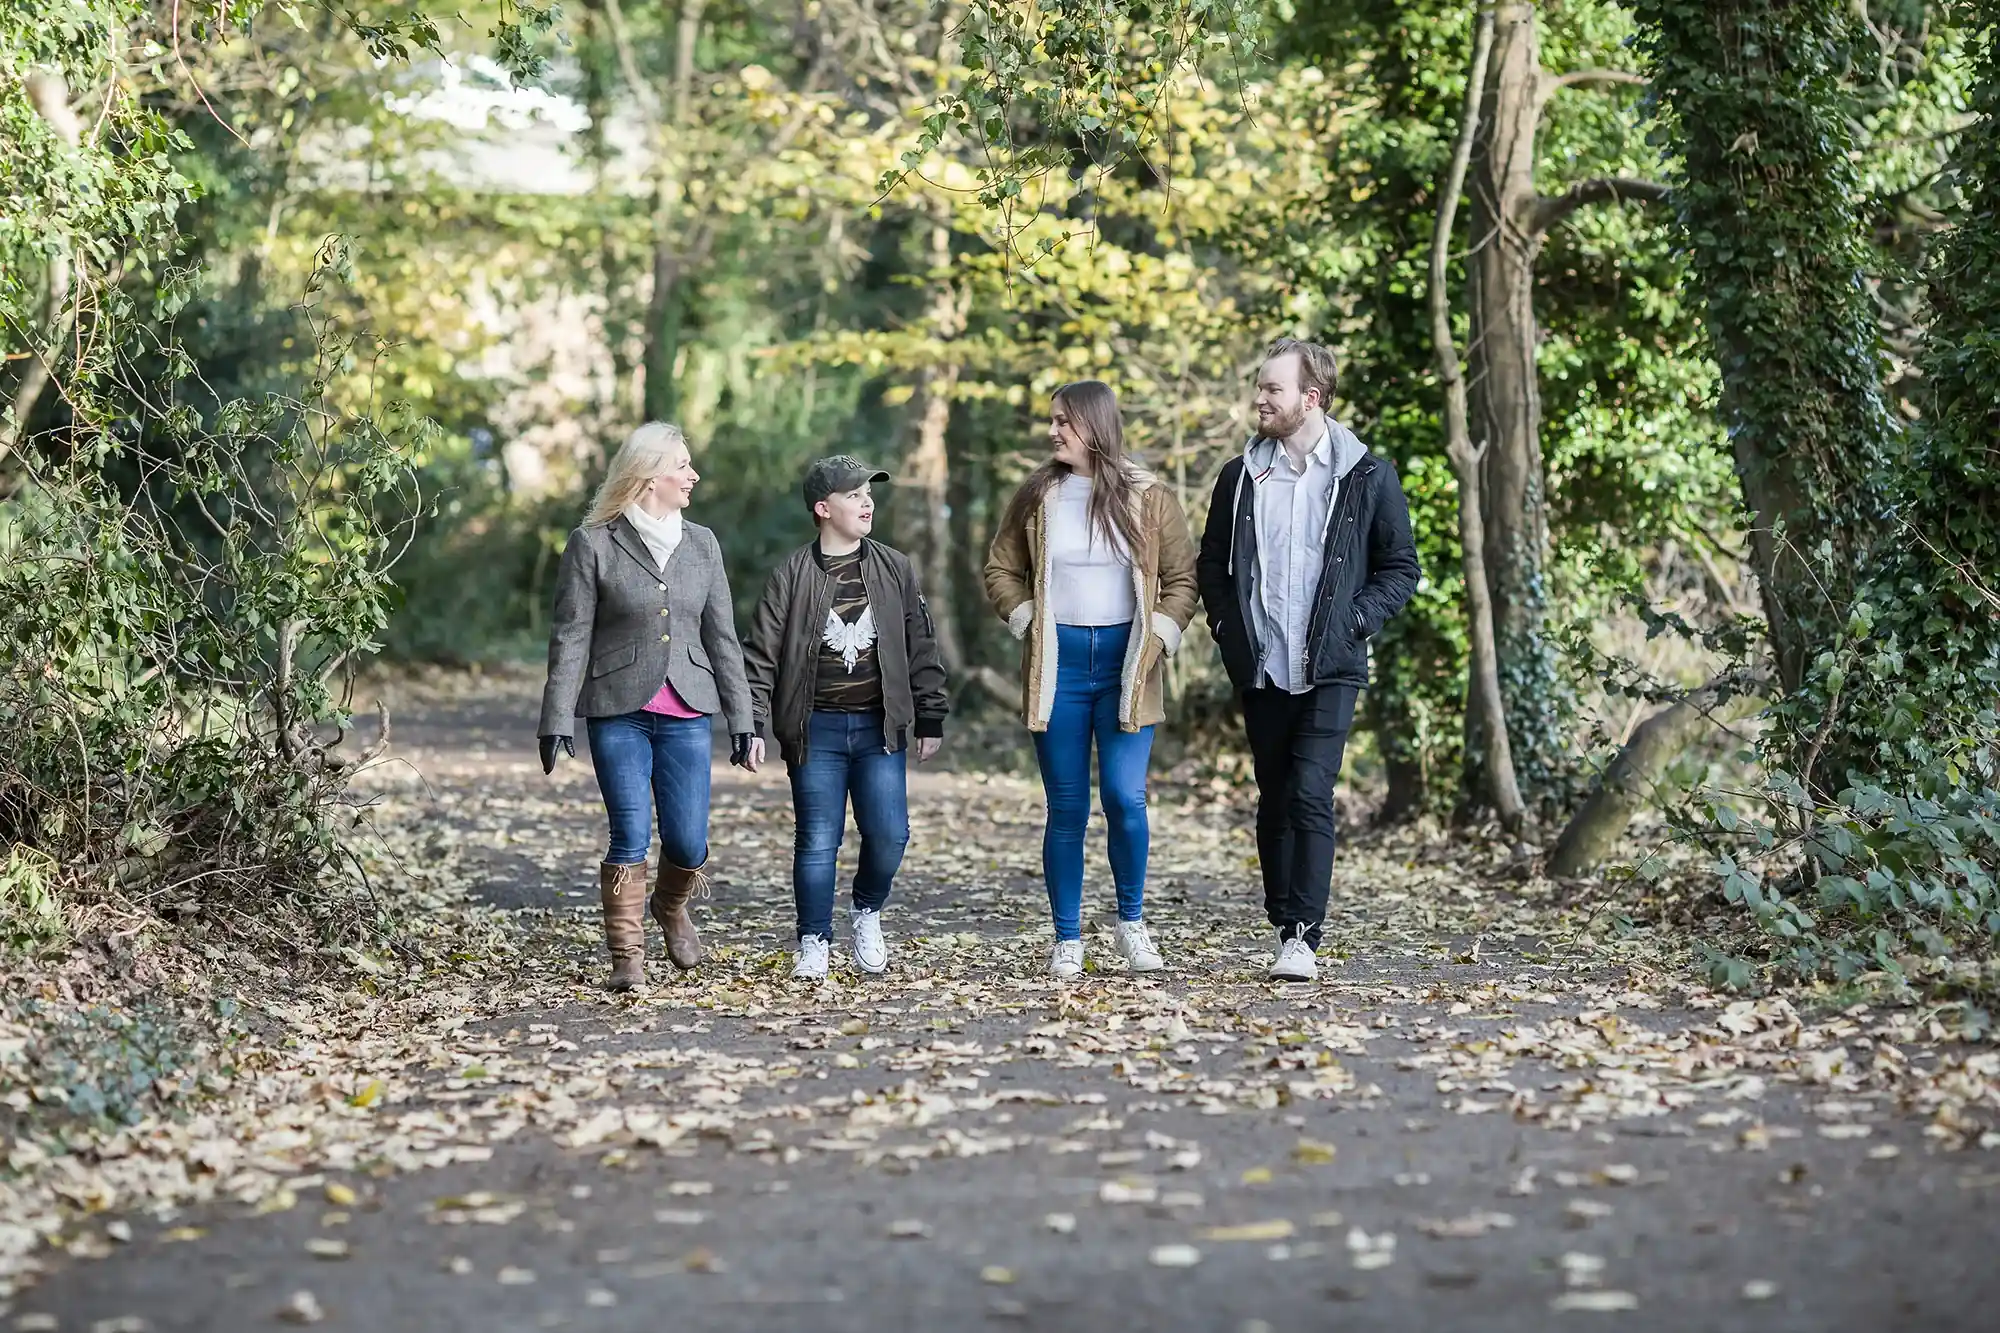 Four people walking together on a forest path surrounded by autumn leaves and trees, engaging in conversation and appearing relaxed.